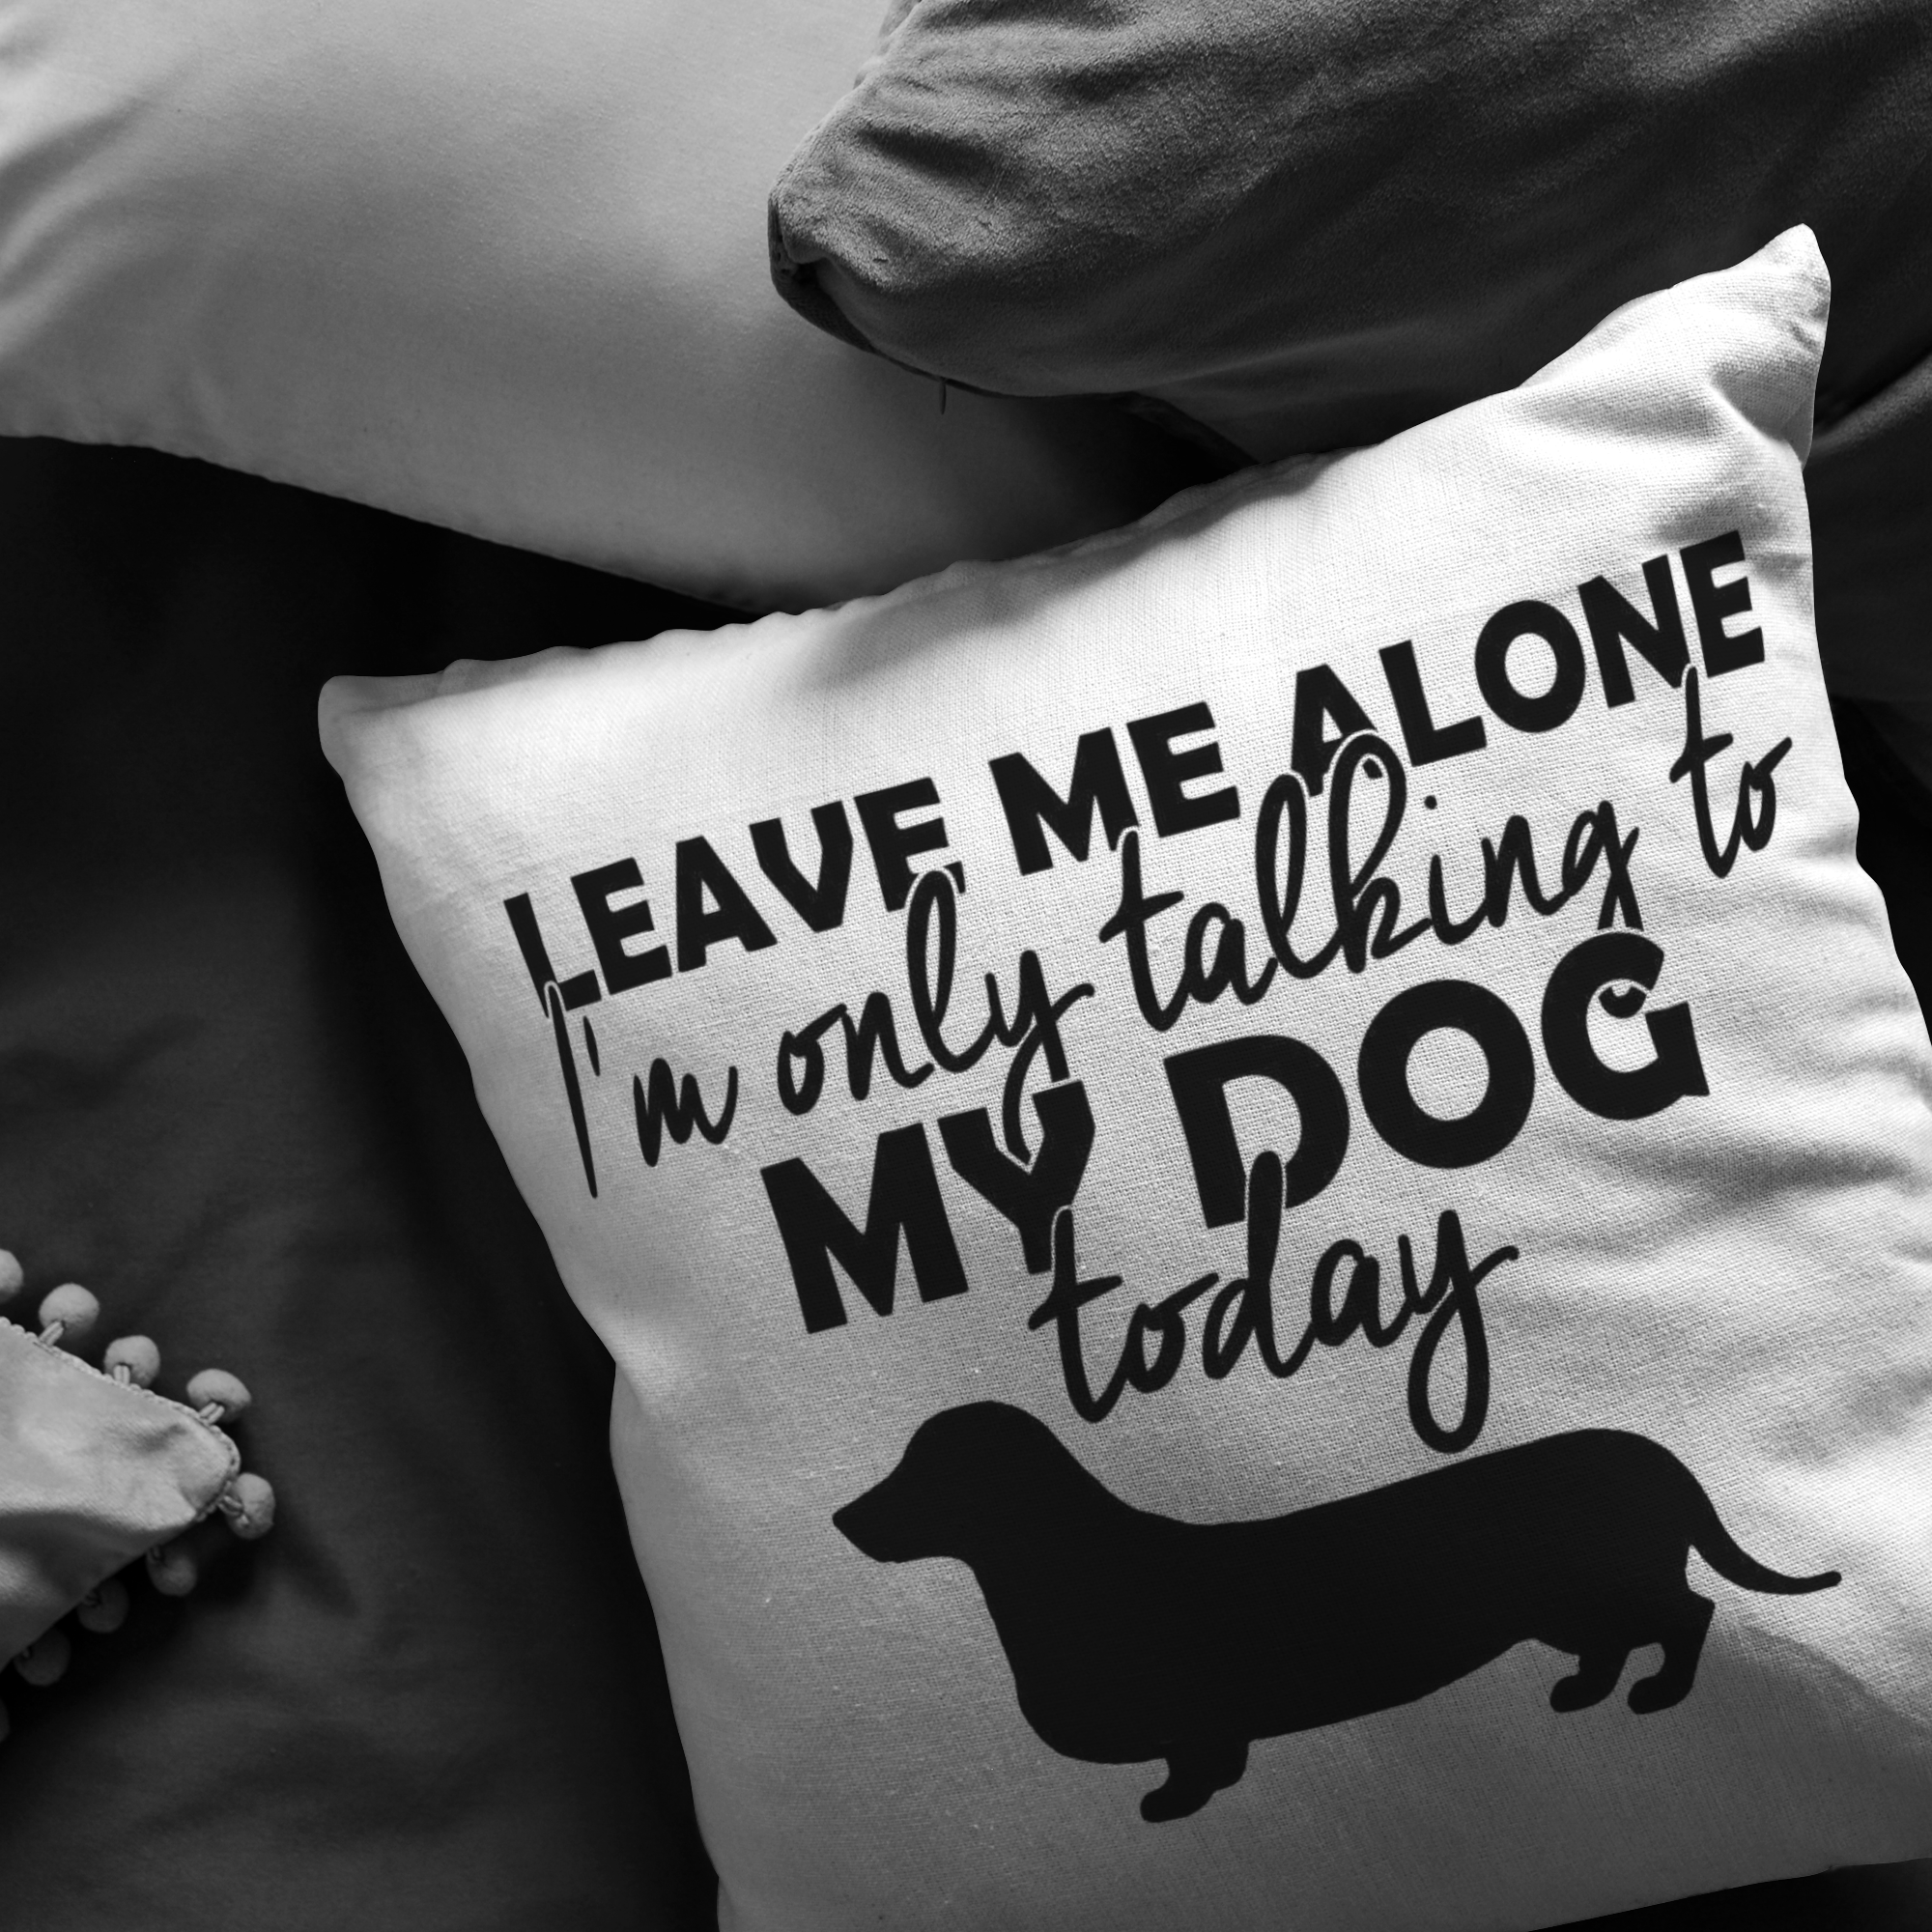 Leave Me Alone Dachshund - Pillow